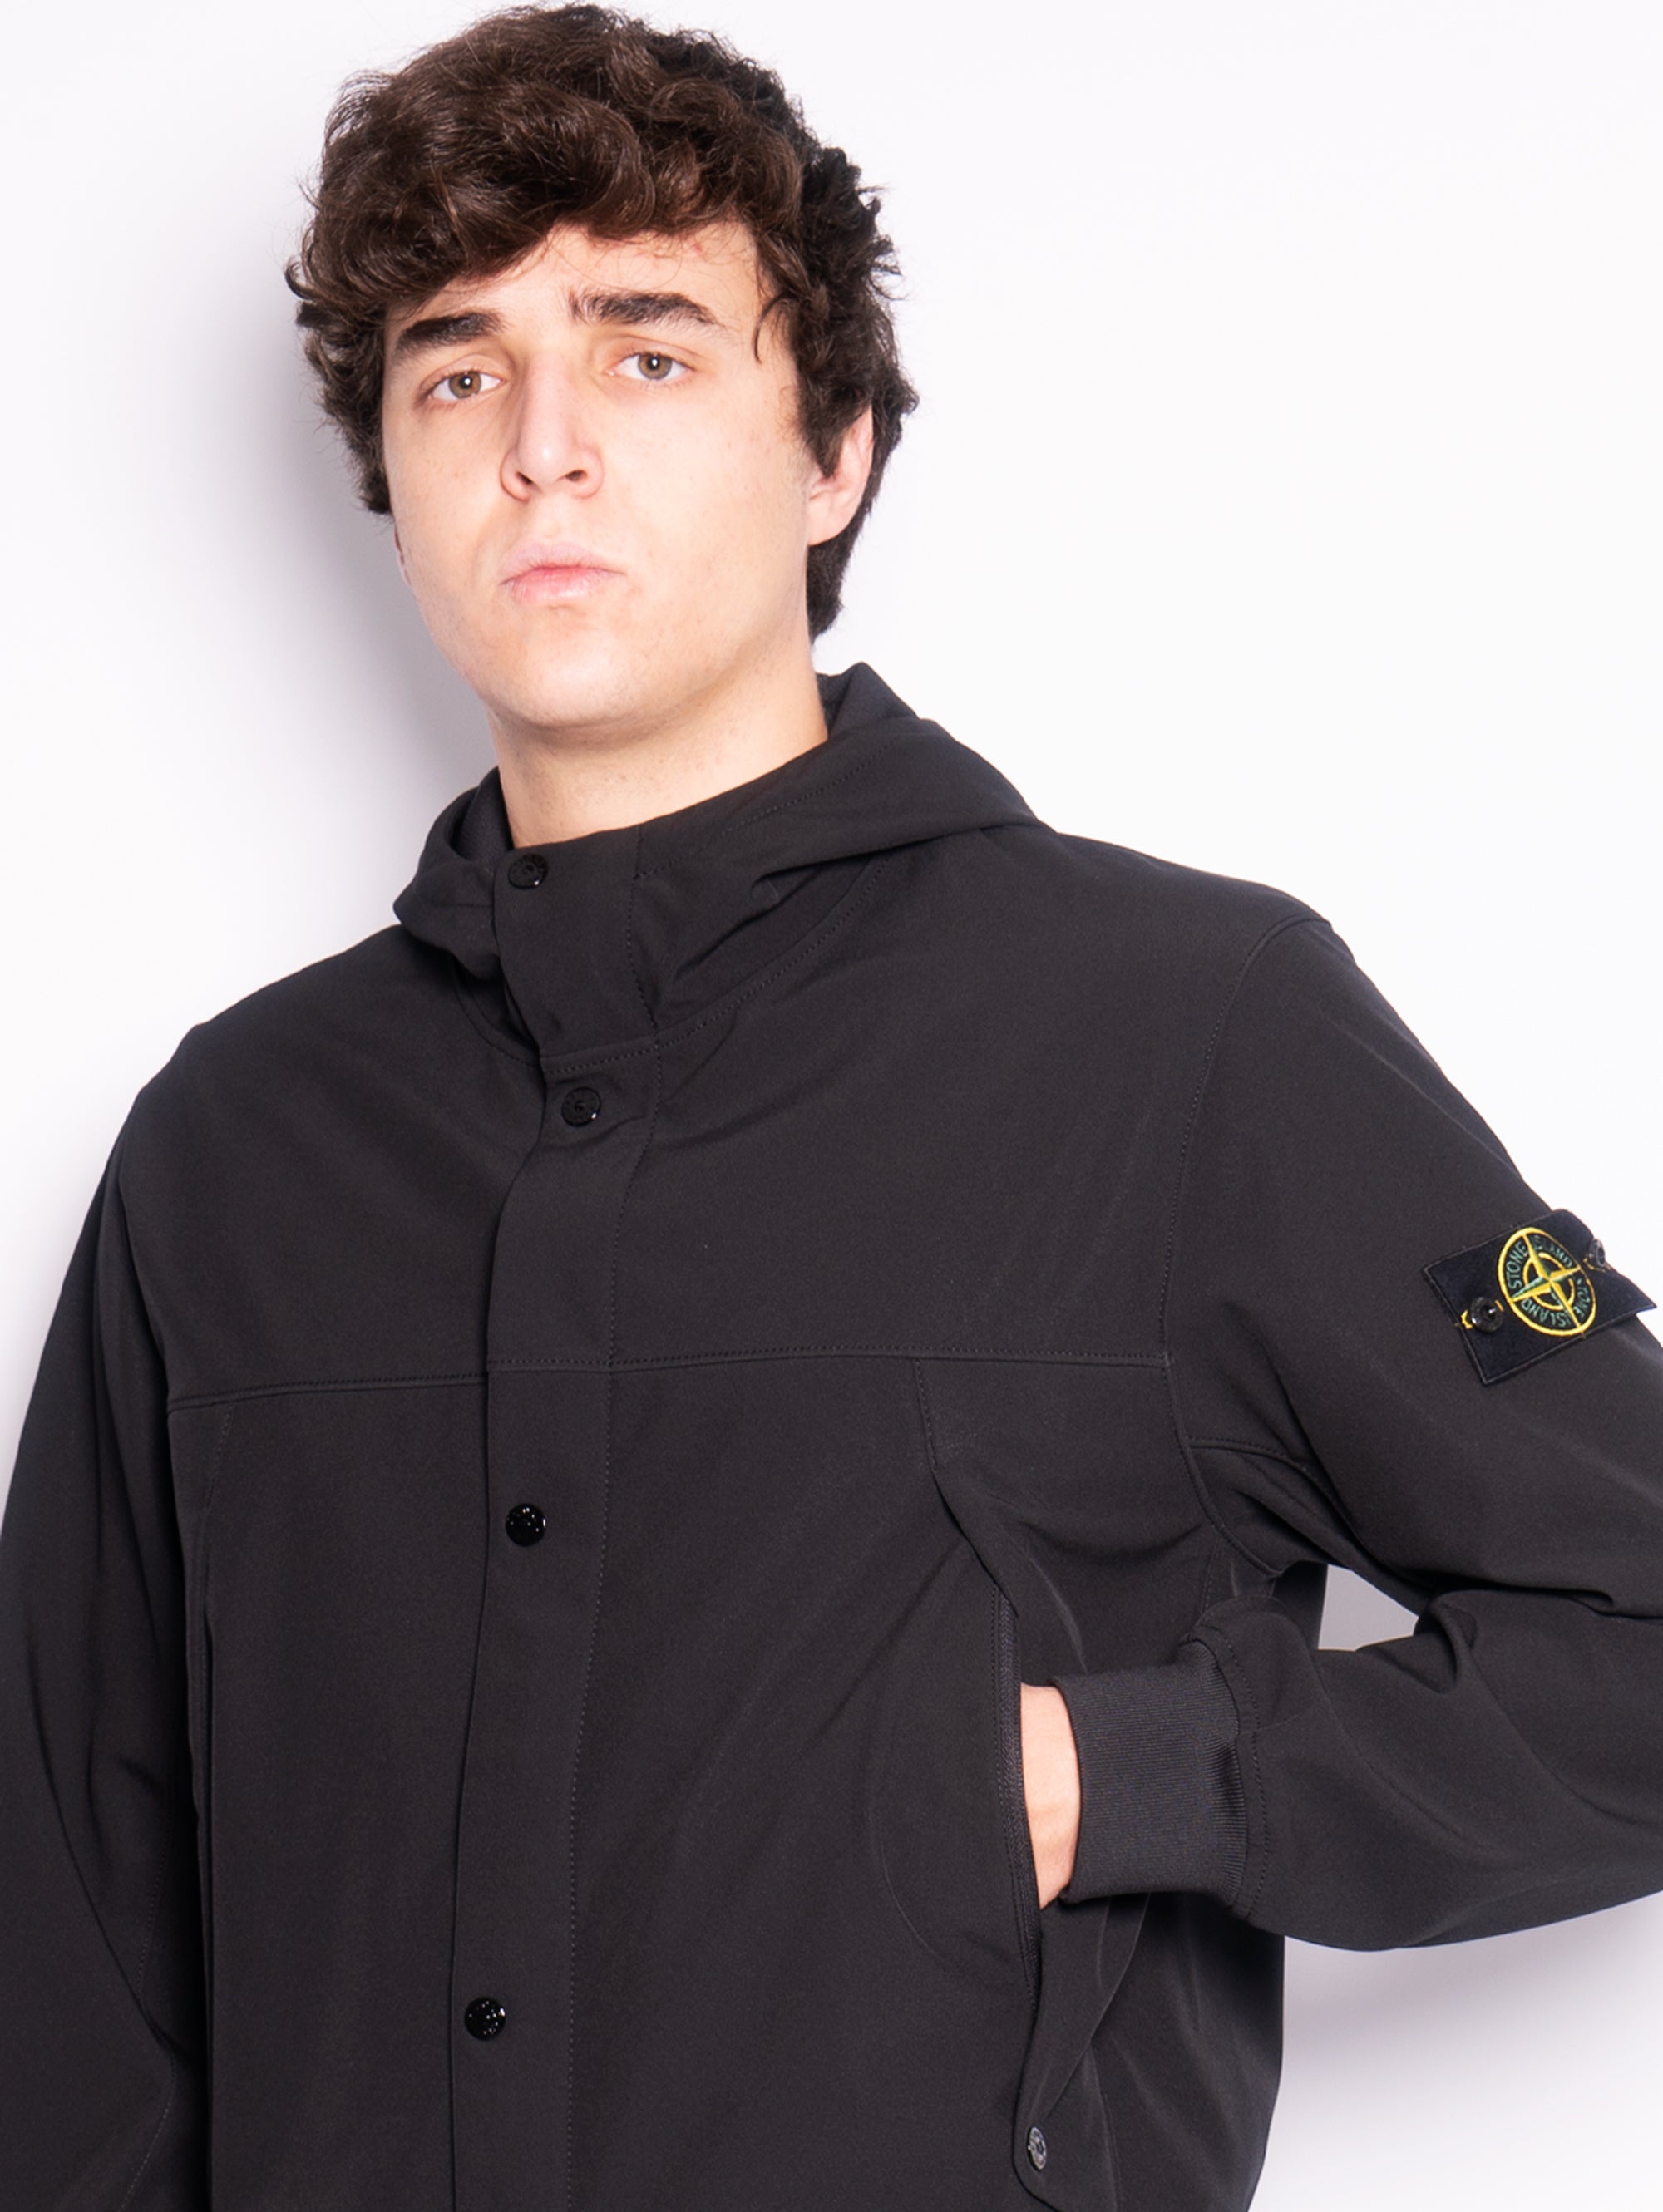 Jacket with Hood in Black Performance Material